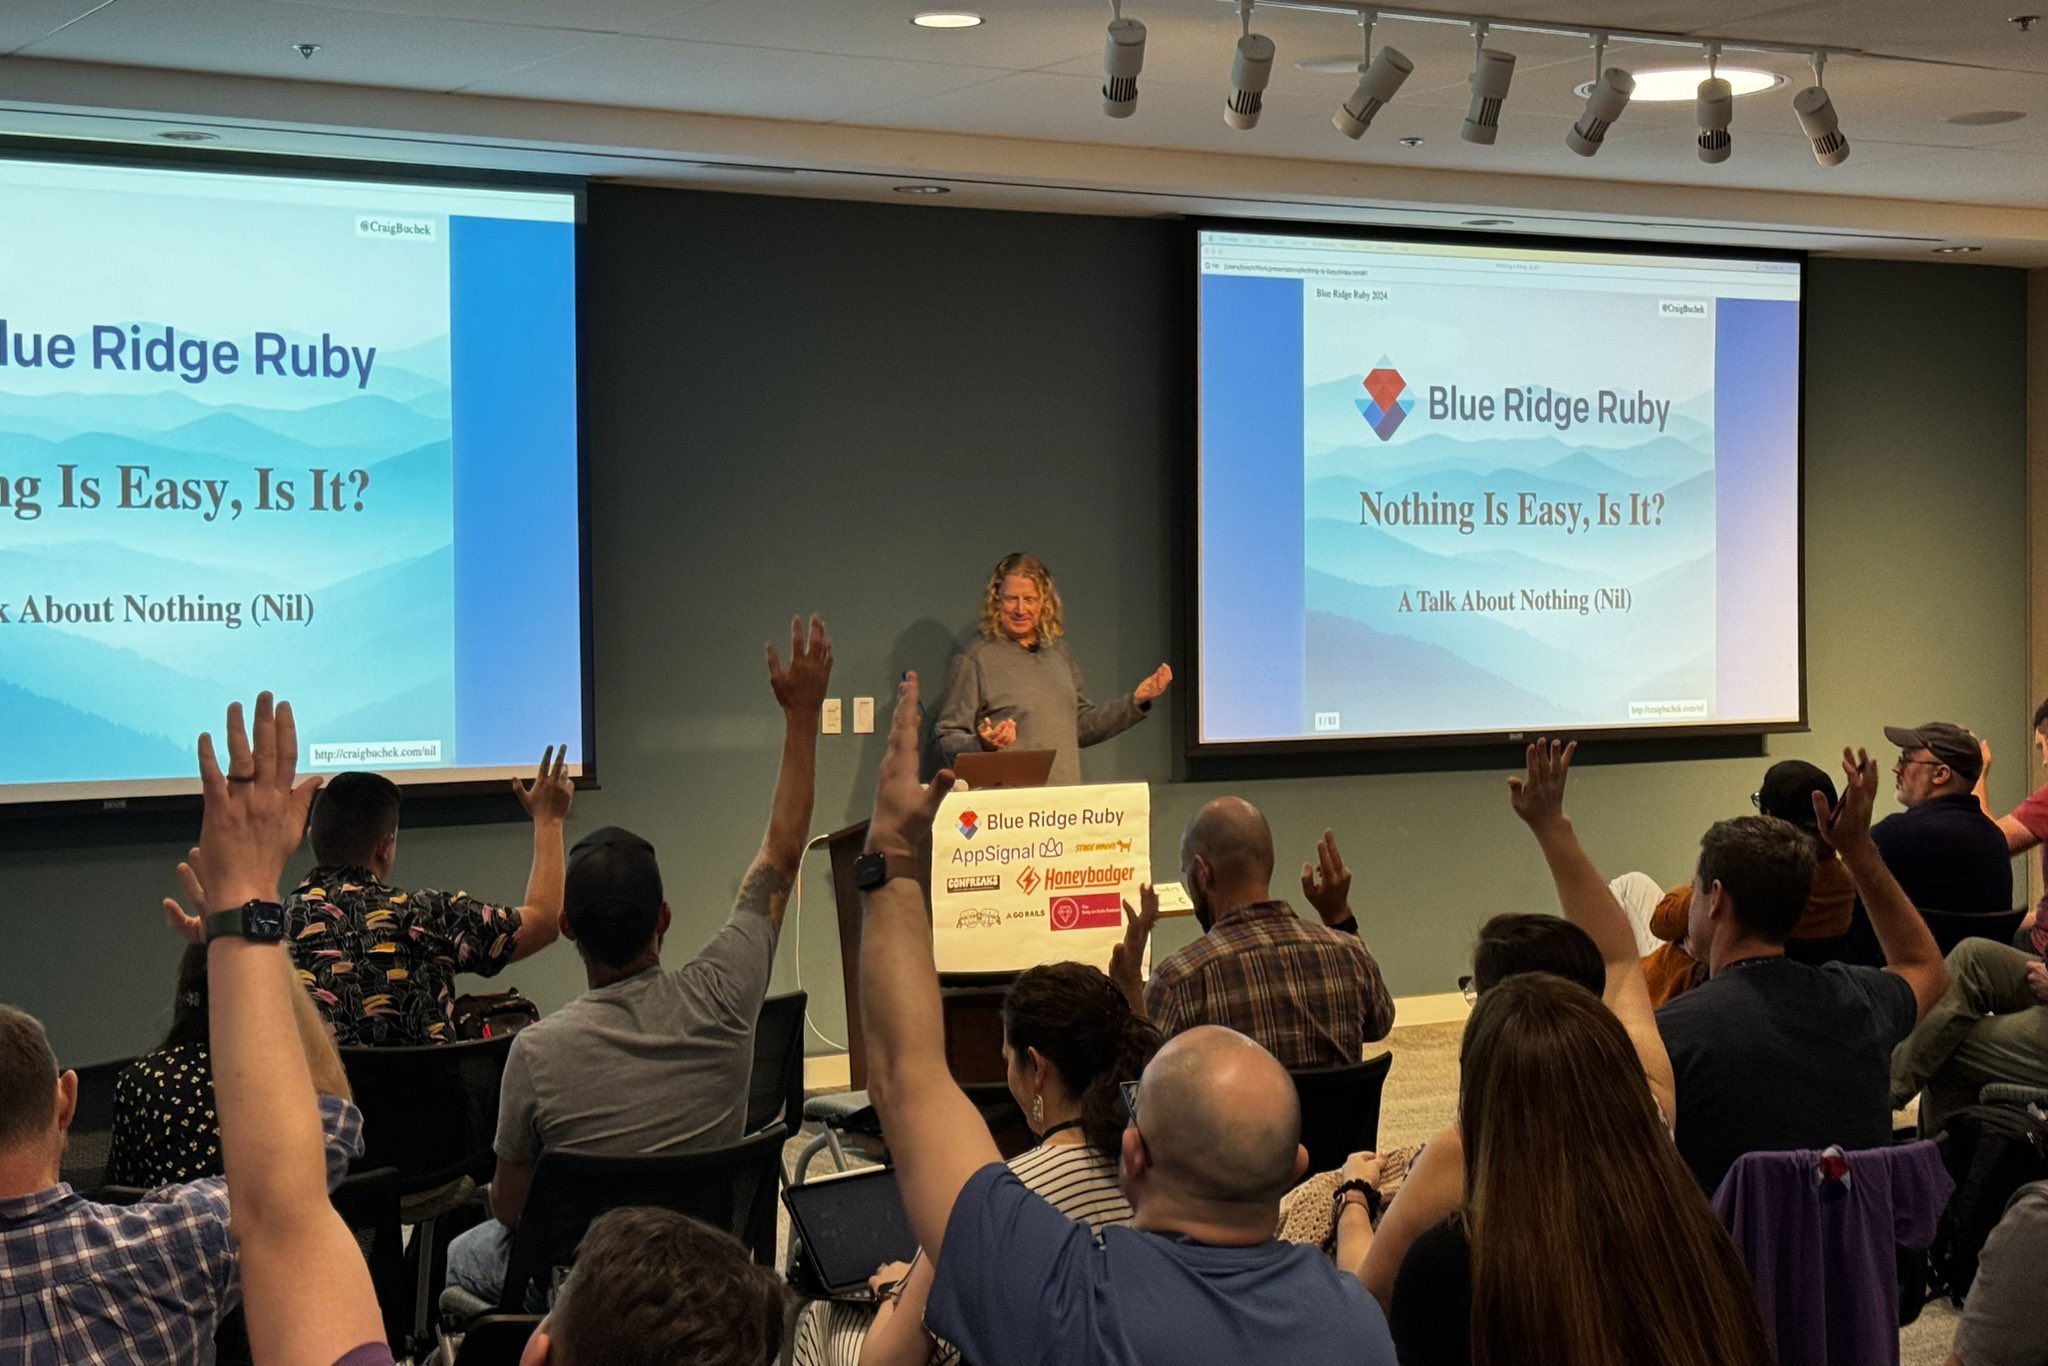 Speaker engaging with the audience during a presentation titled “Nothing Is Easy, Is It? A Talk About Nothing (Nil)” at the Blue Ridge Ruby conference, with several attendees raising their hands in response.